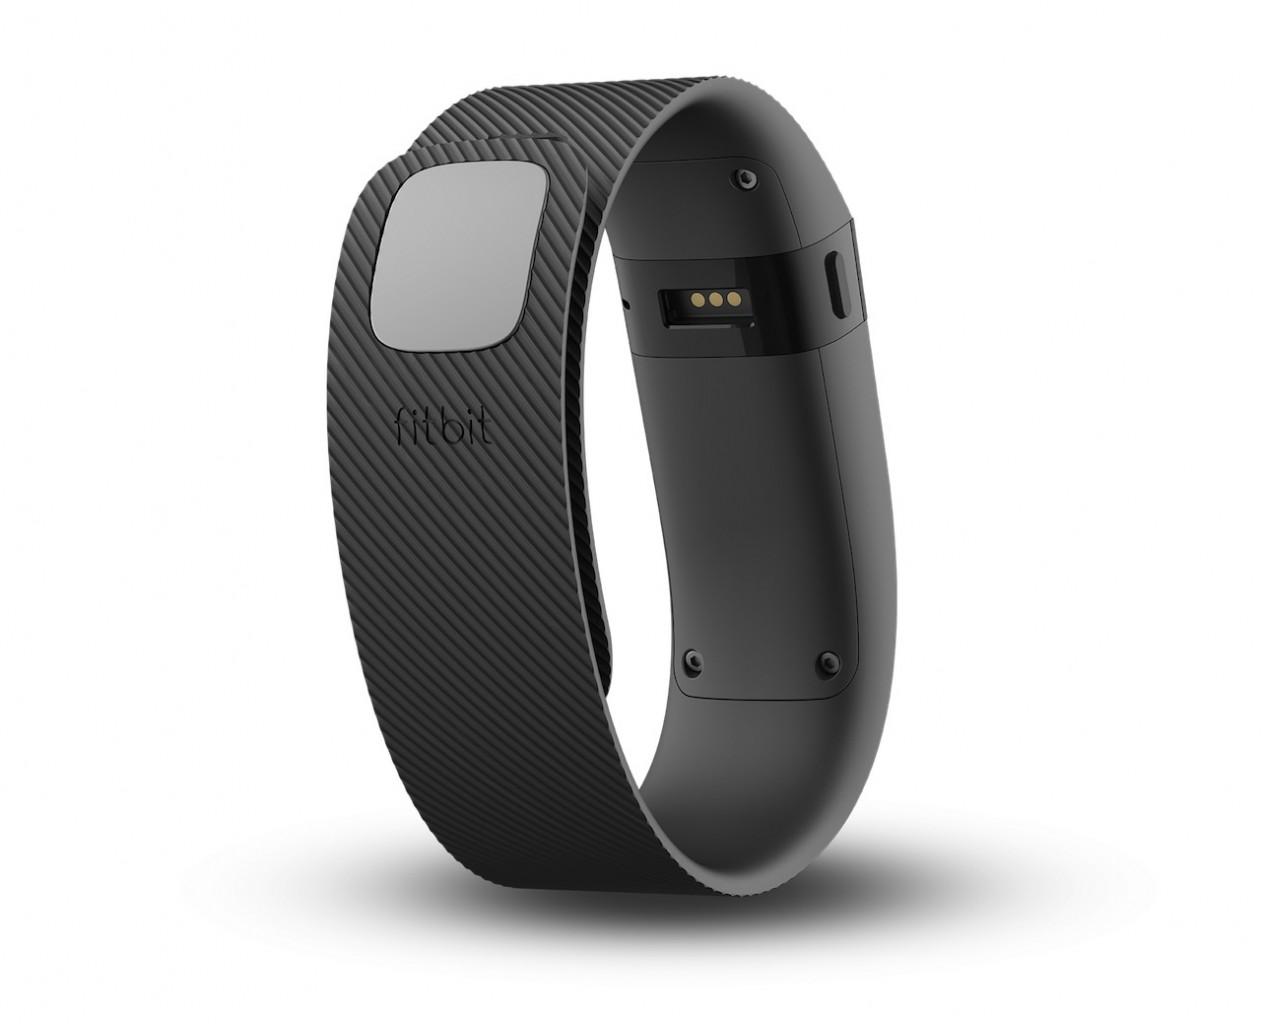 Fitbit adds GPS and heart-rate tracking in wearable refresh - SlashGear